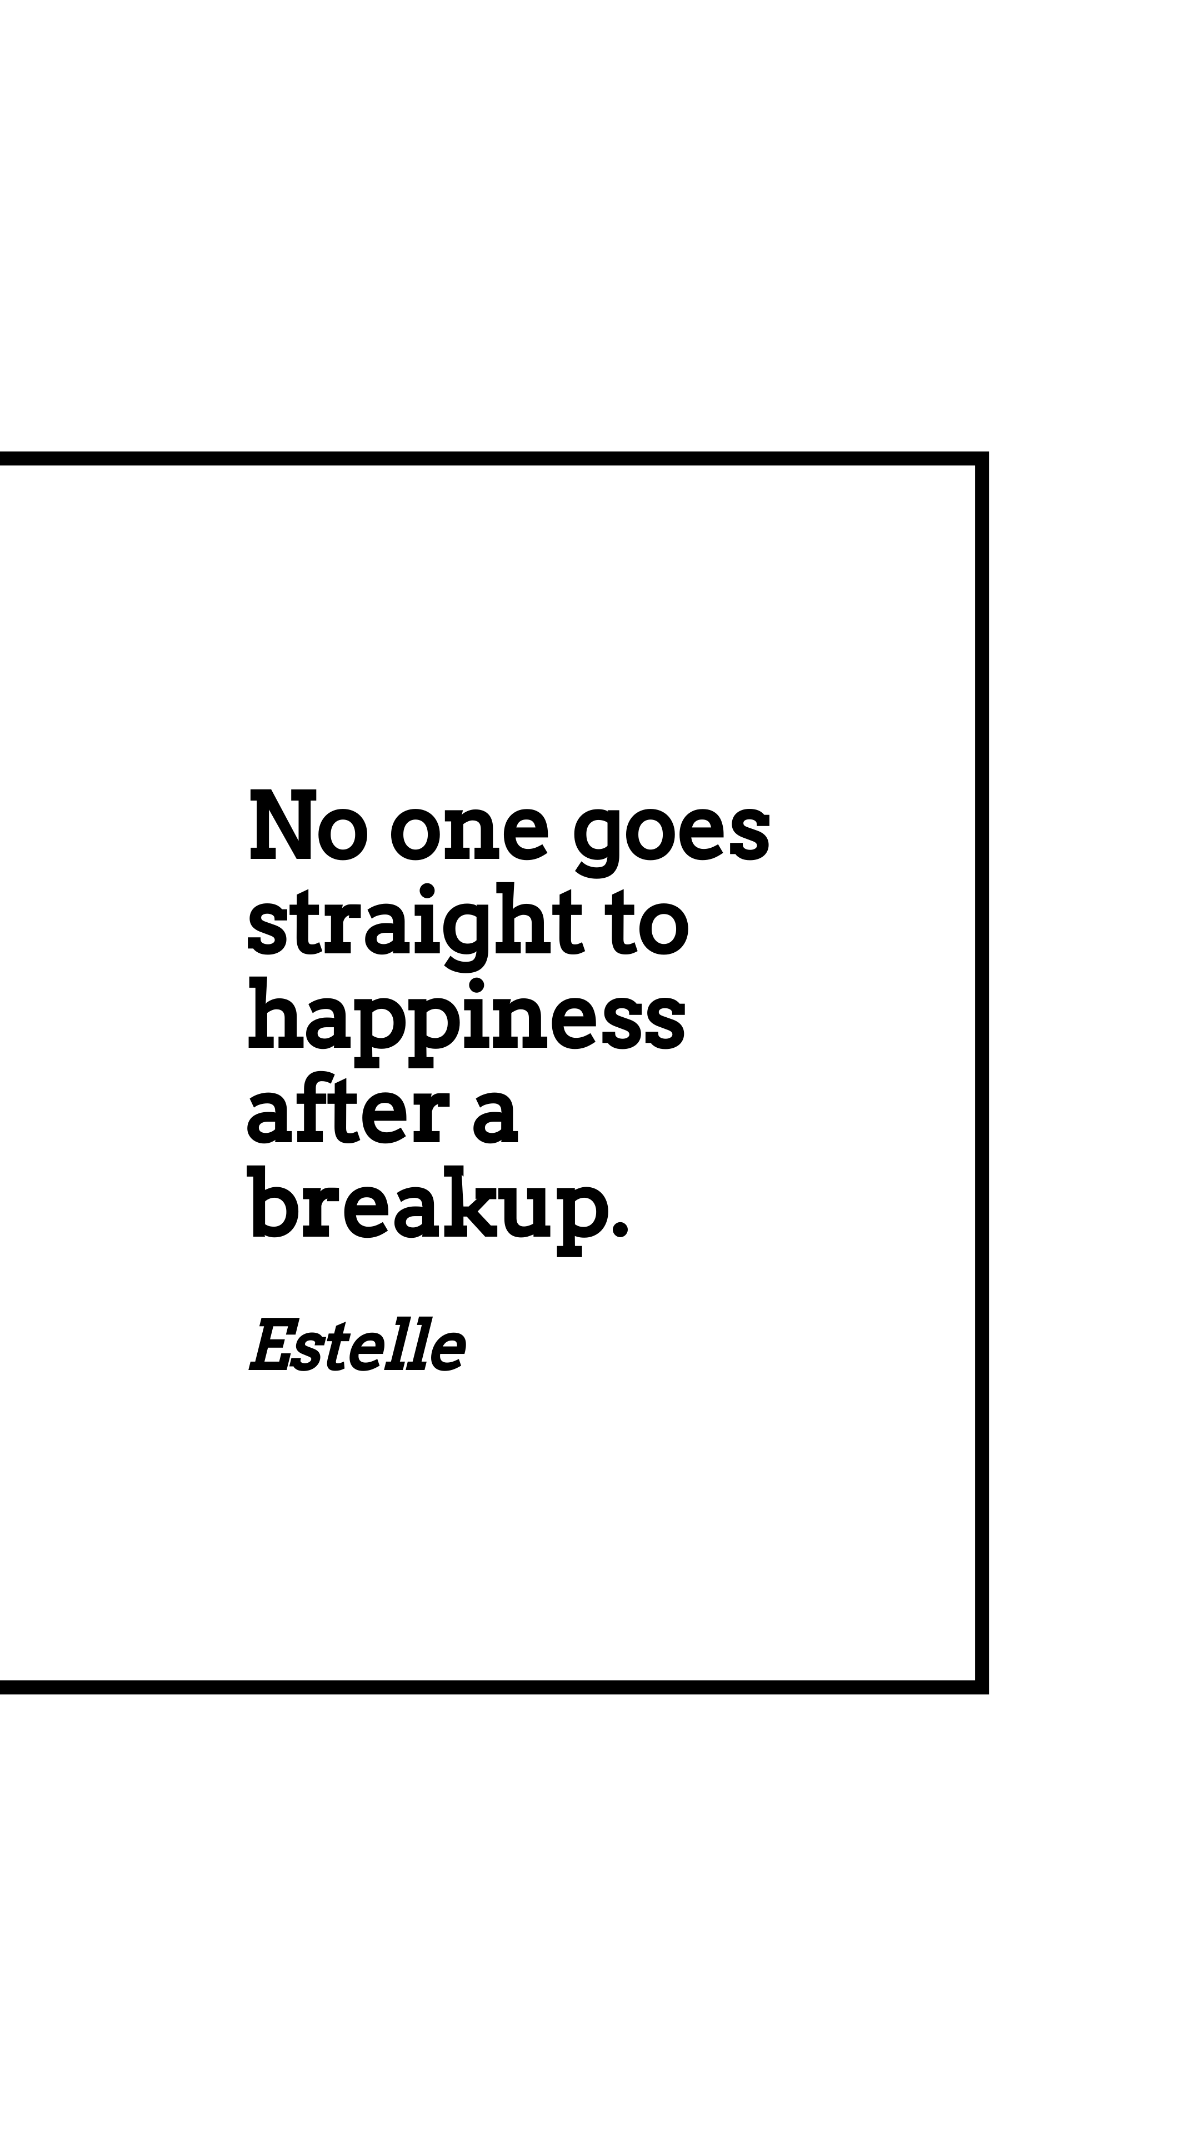 Estelle - No one goes straight to happiness after a breakup. Template